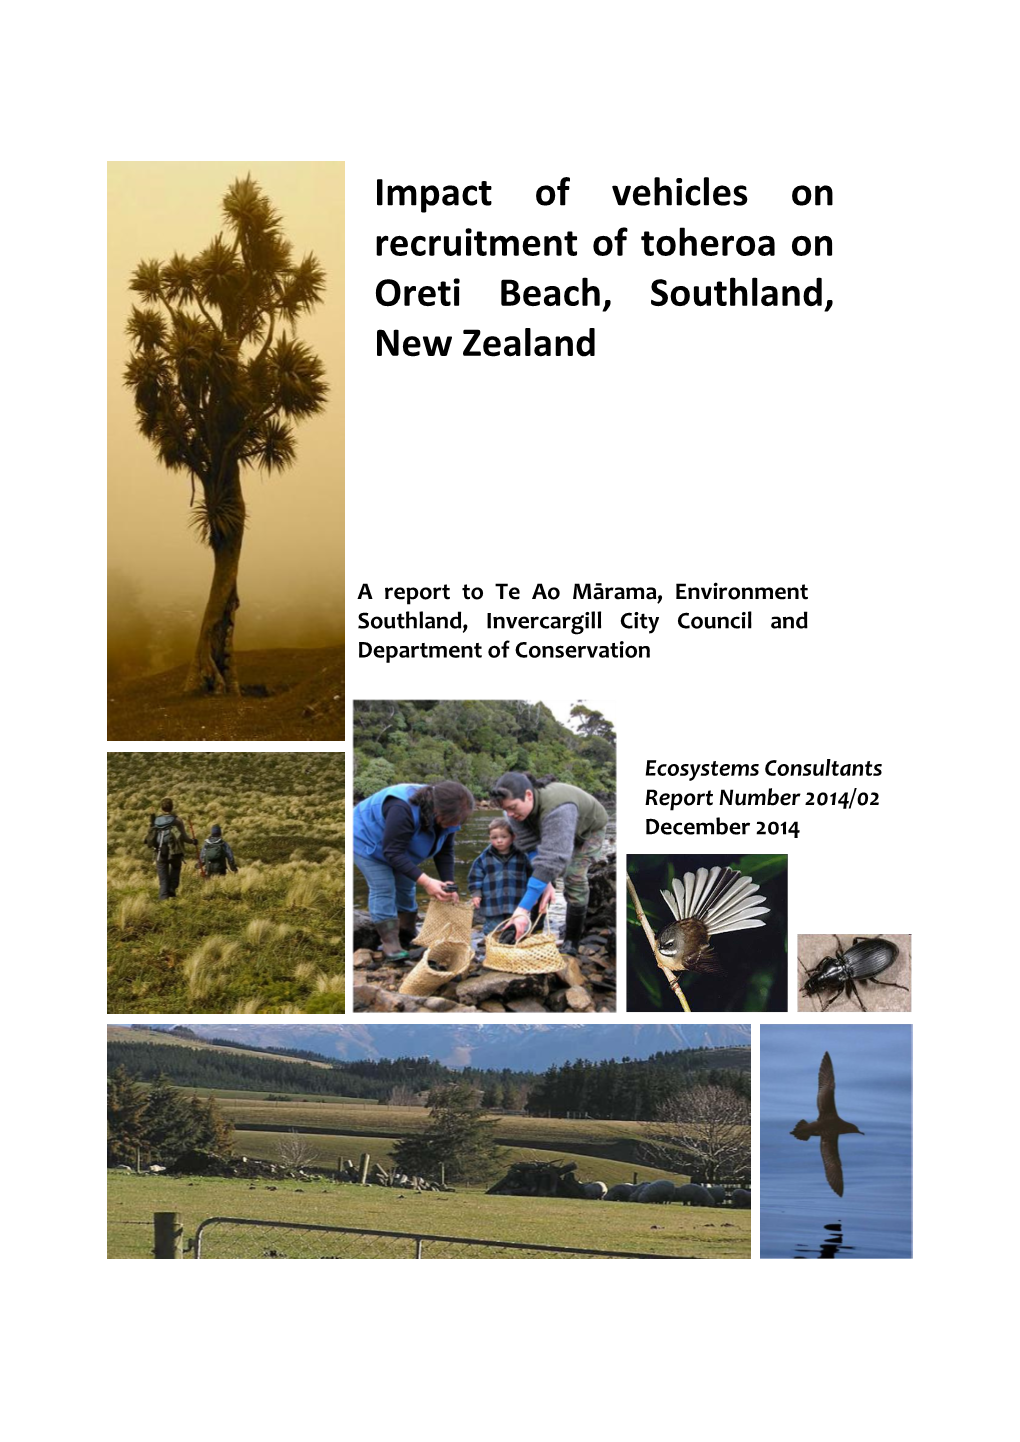 Potential Impacts of Vehicle Traffic on Recruitment of Toheroa (Paphies Ventricosa) on Oreti Beach, Southland, New Zealand